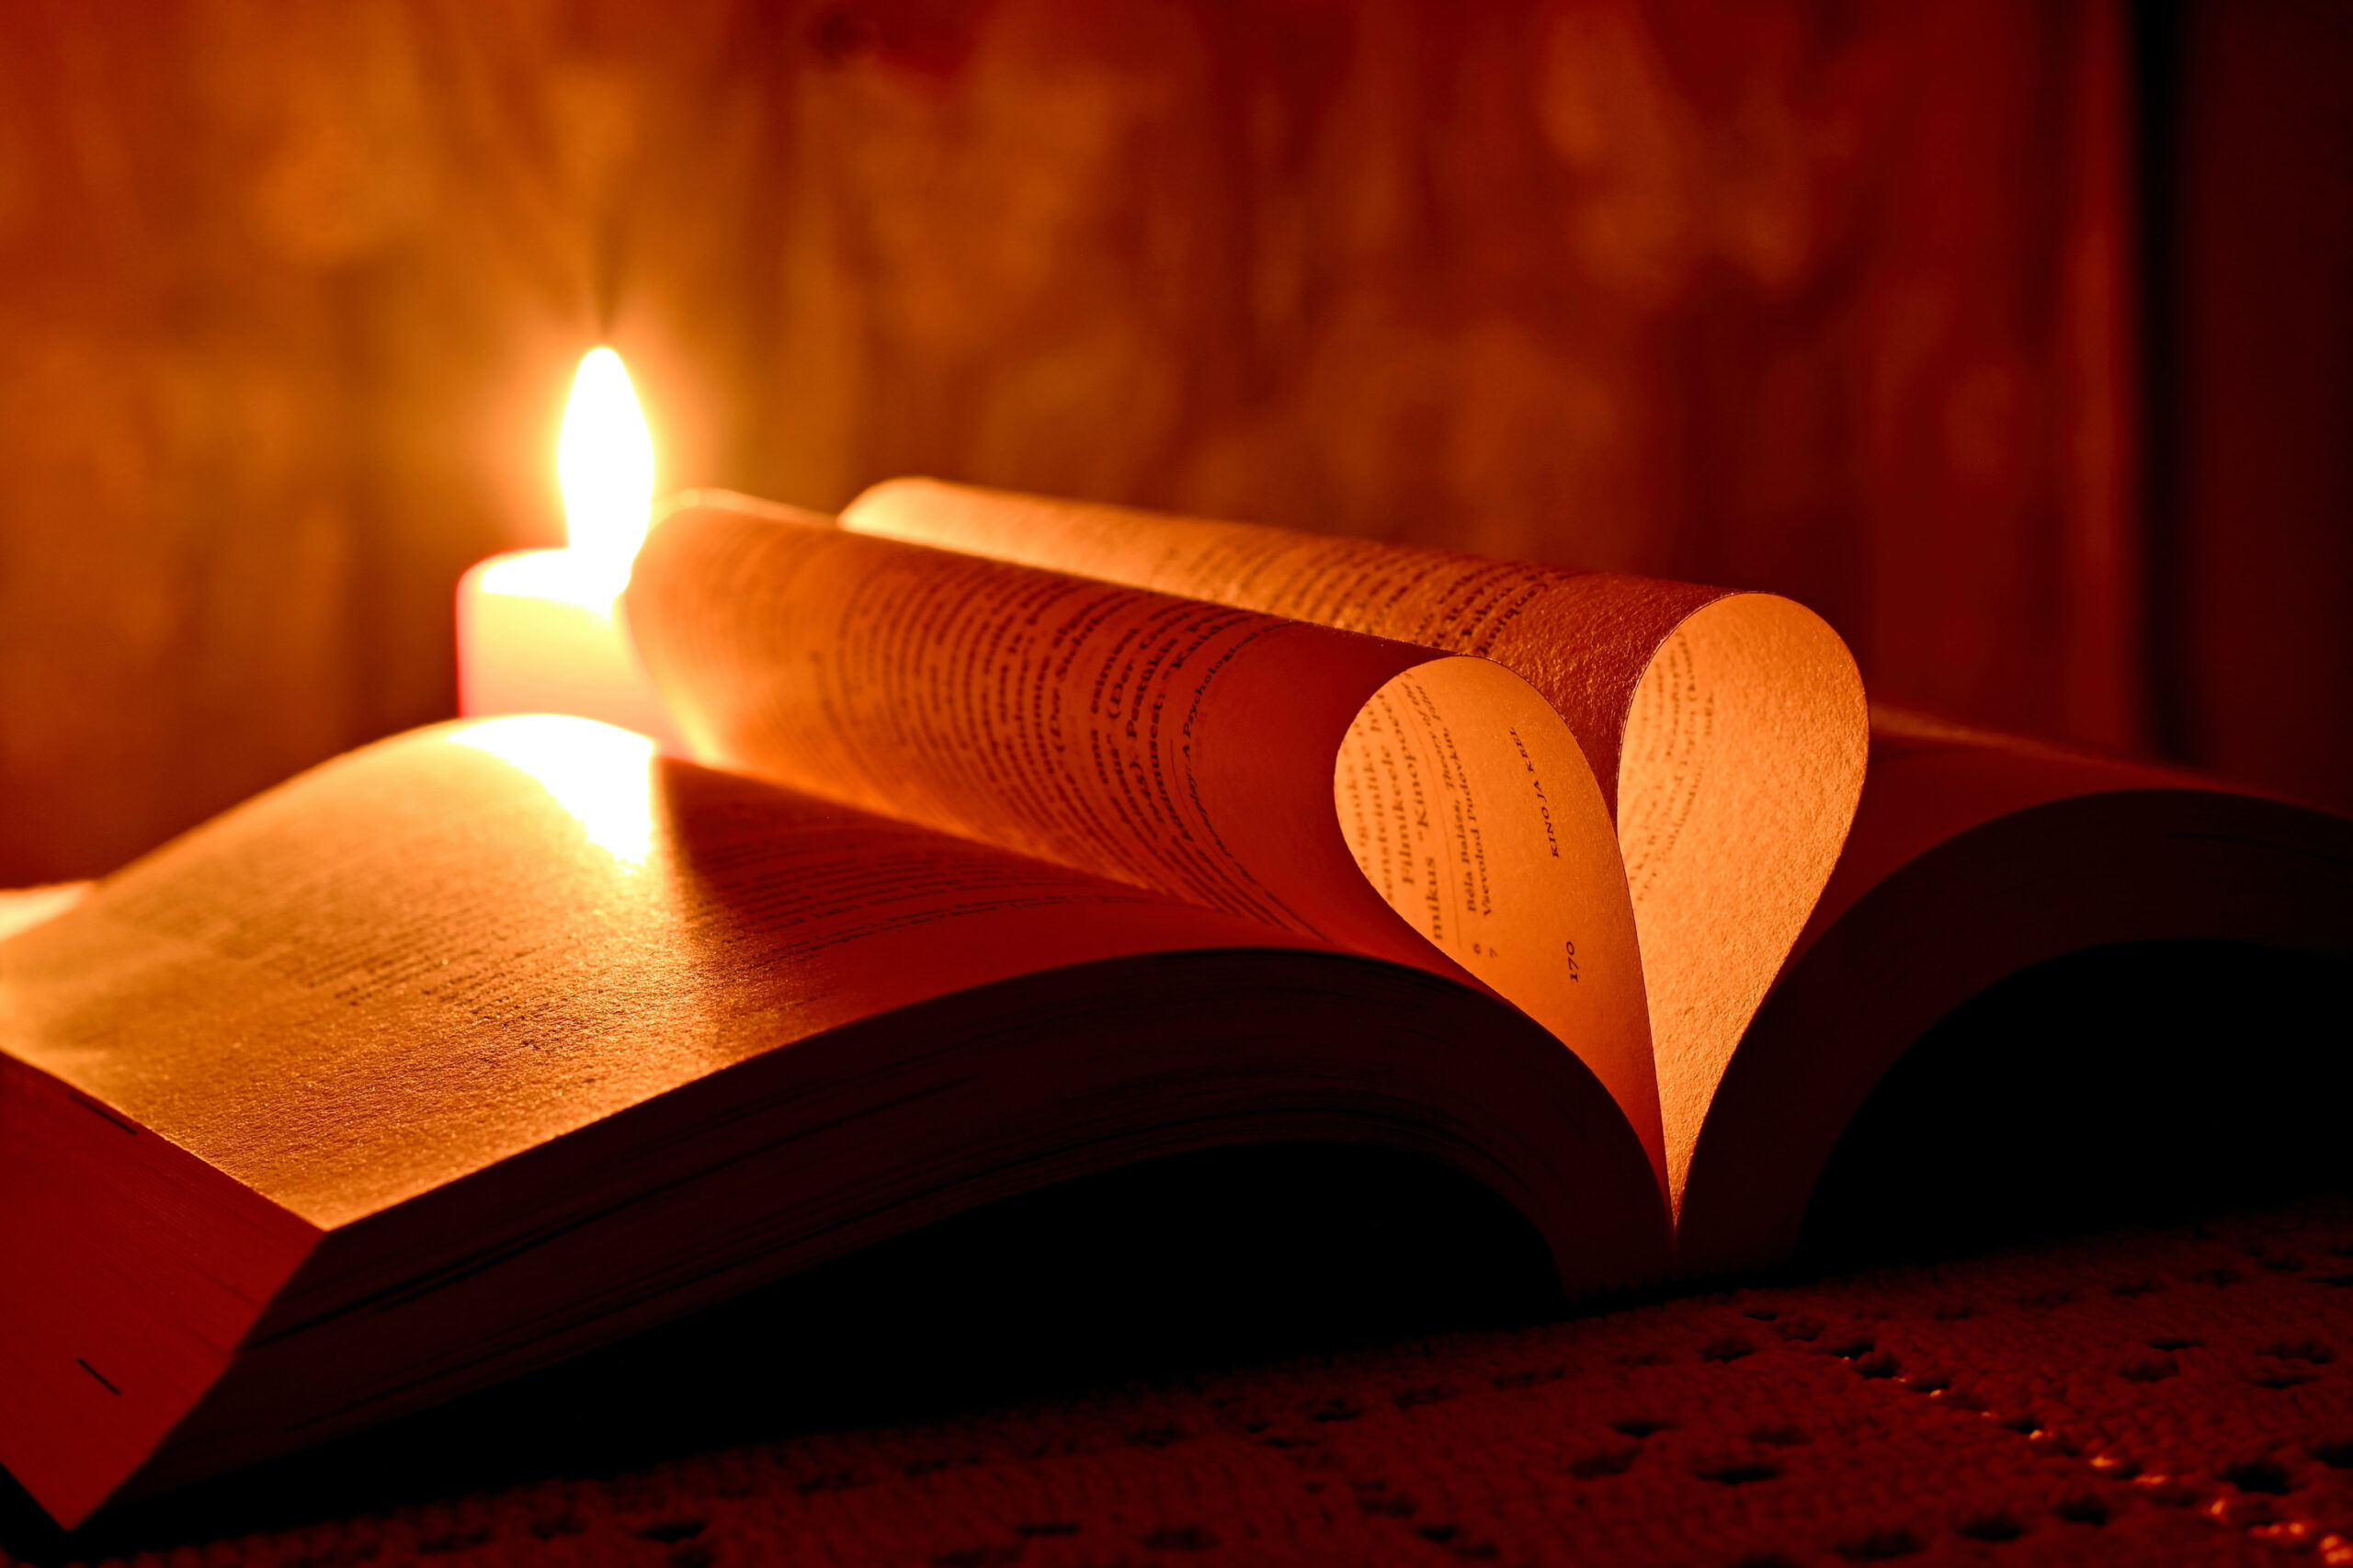 image of an open bible with the pages folded to make the shape of a heart and a lit candle behind the bible